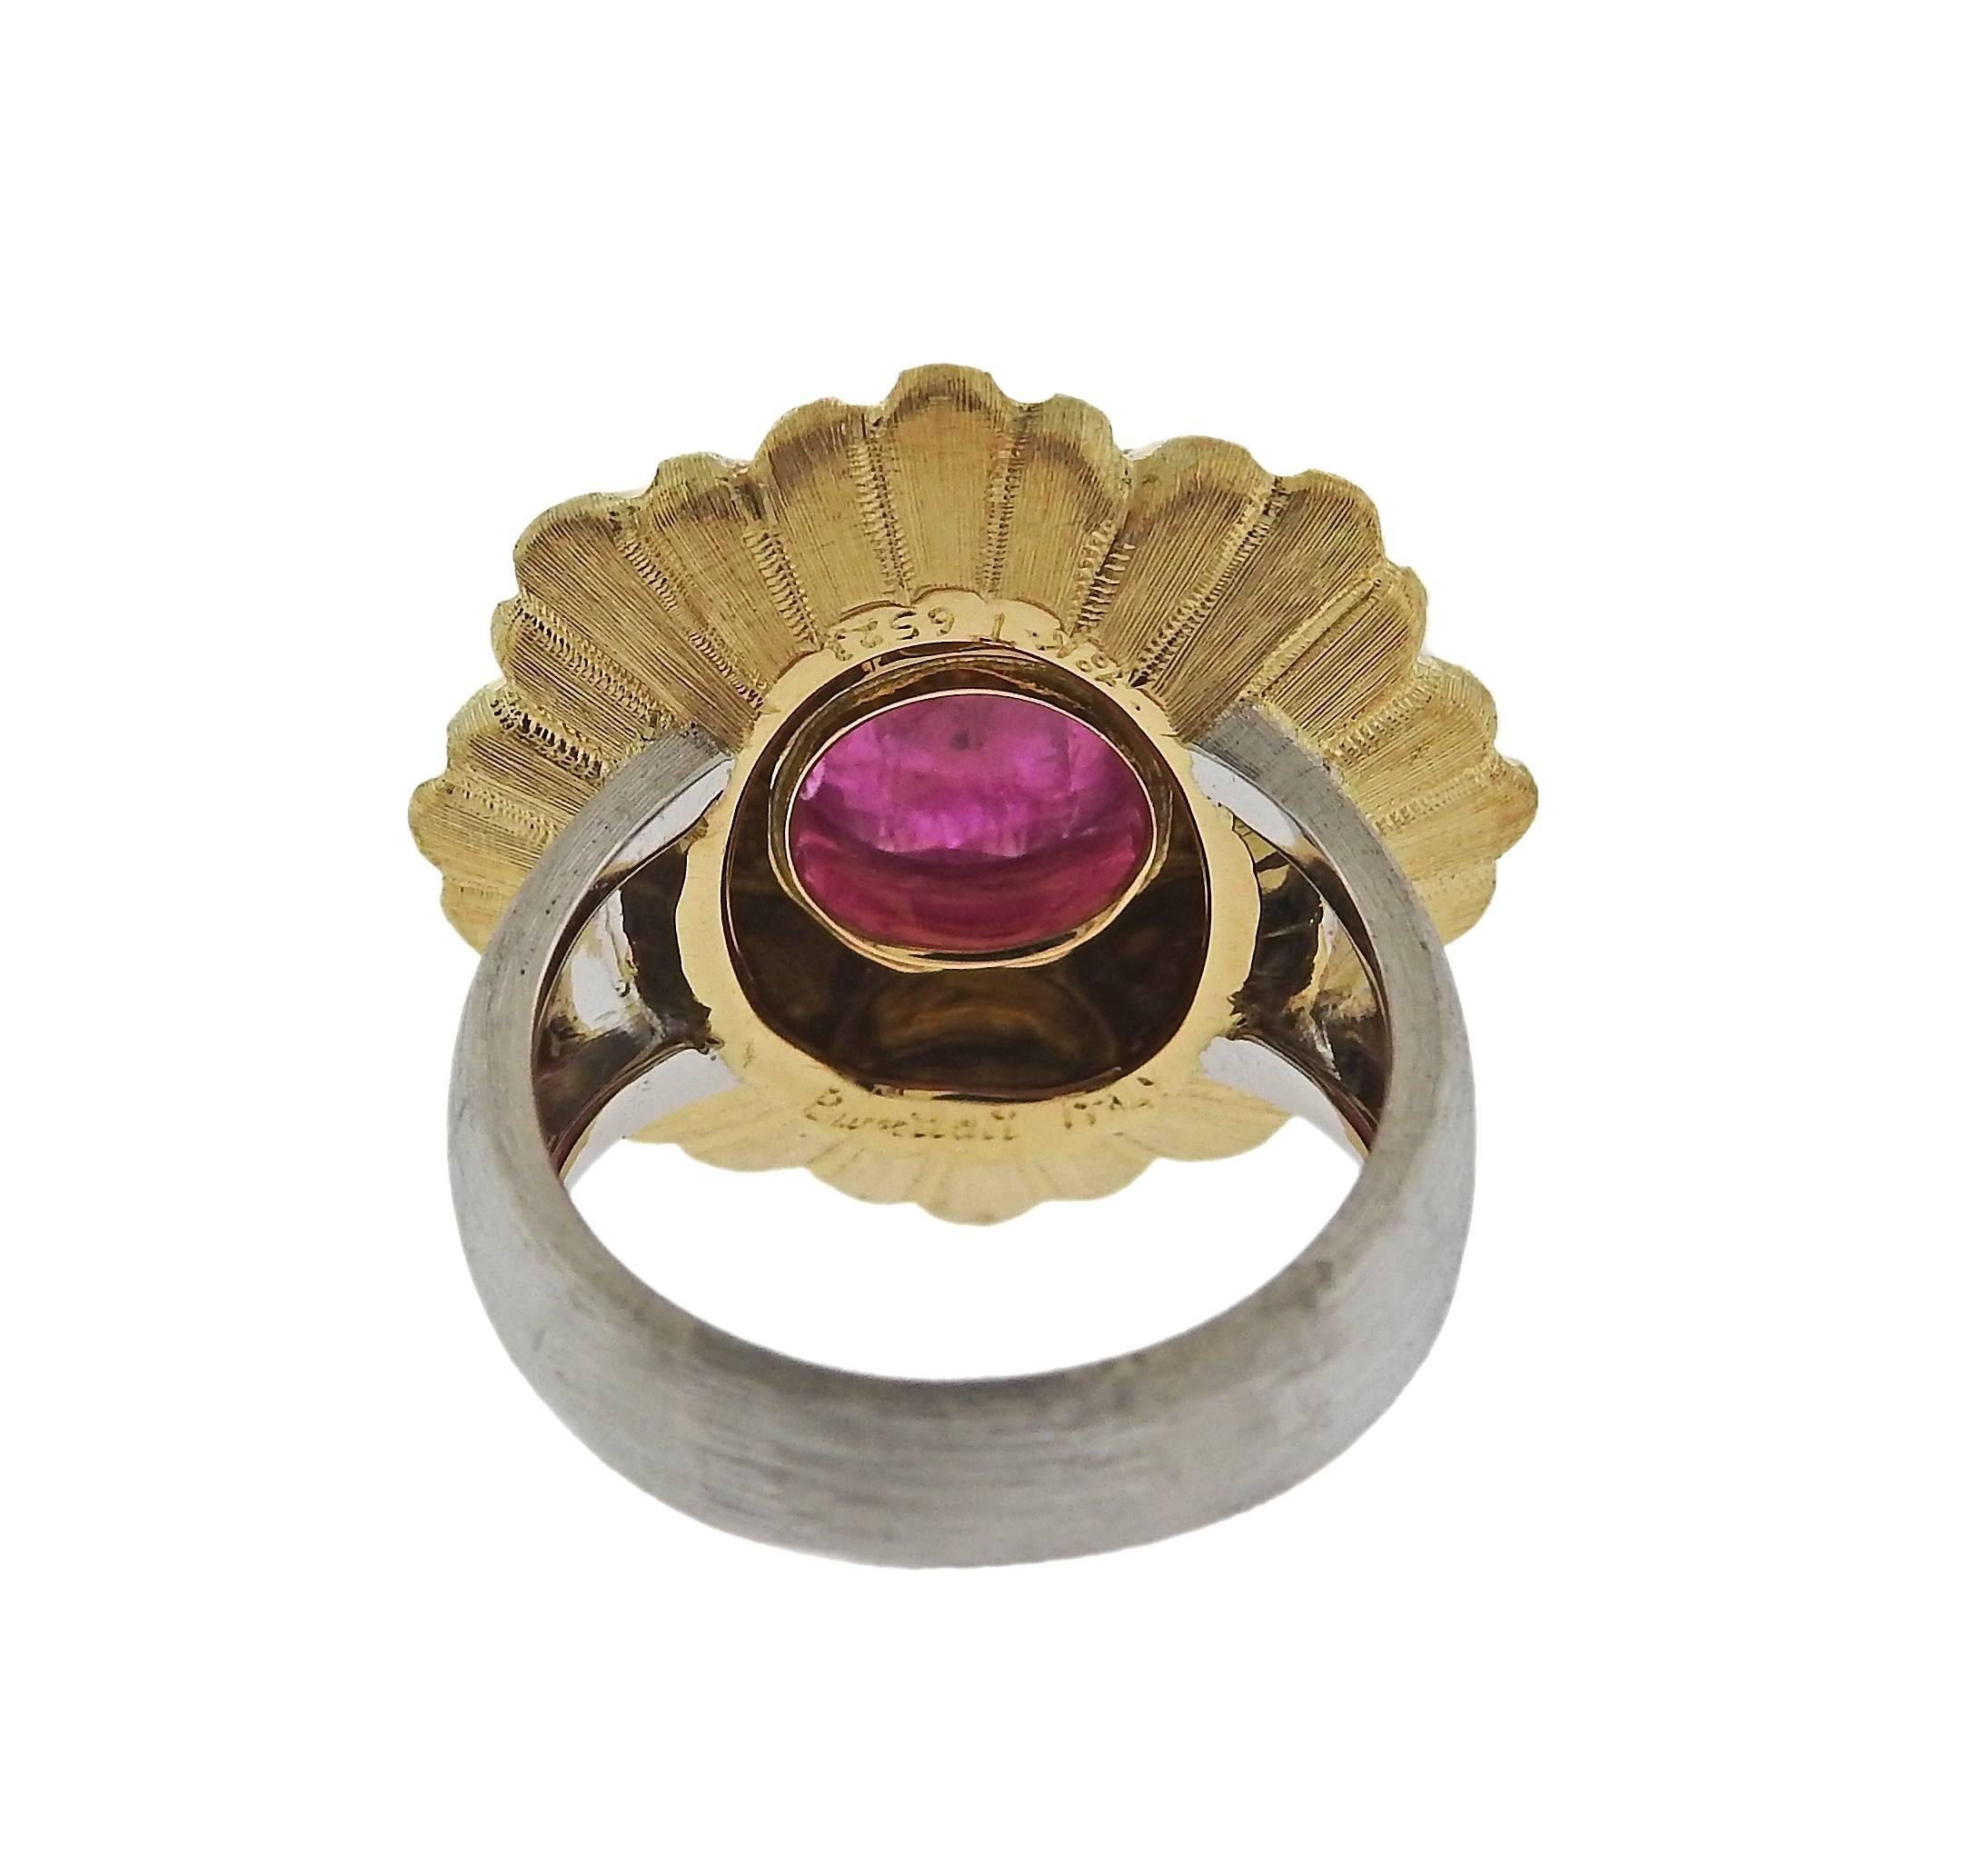 18k gold ring crafted by Buccellati featuring a 1.65ct ruby center. Ring is a size 6.25, ring top is 23mm x 23mm. Marked T6523, Ialy, 18k, Buccellati . Weight is 12.3 grams. Comes with Buccellati paperwork and retails for $23,900.